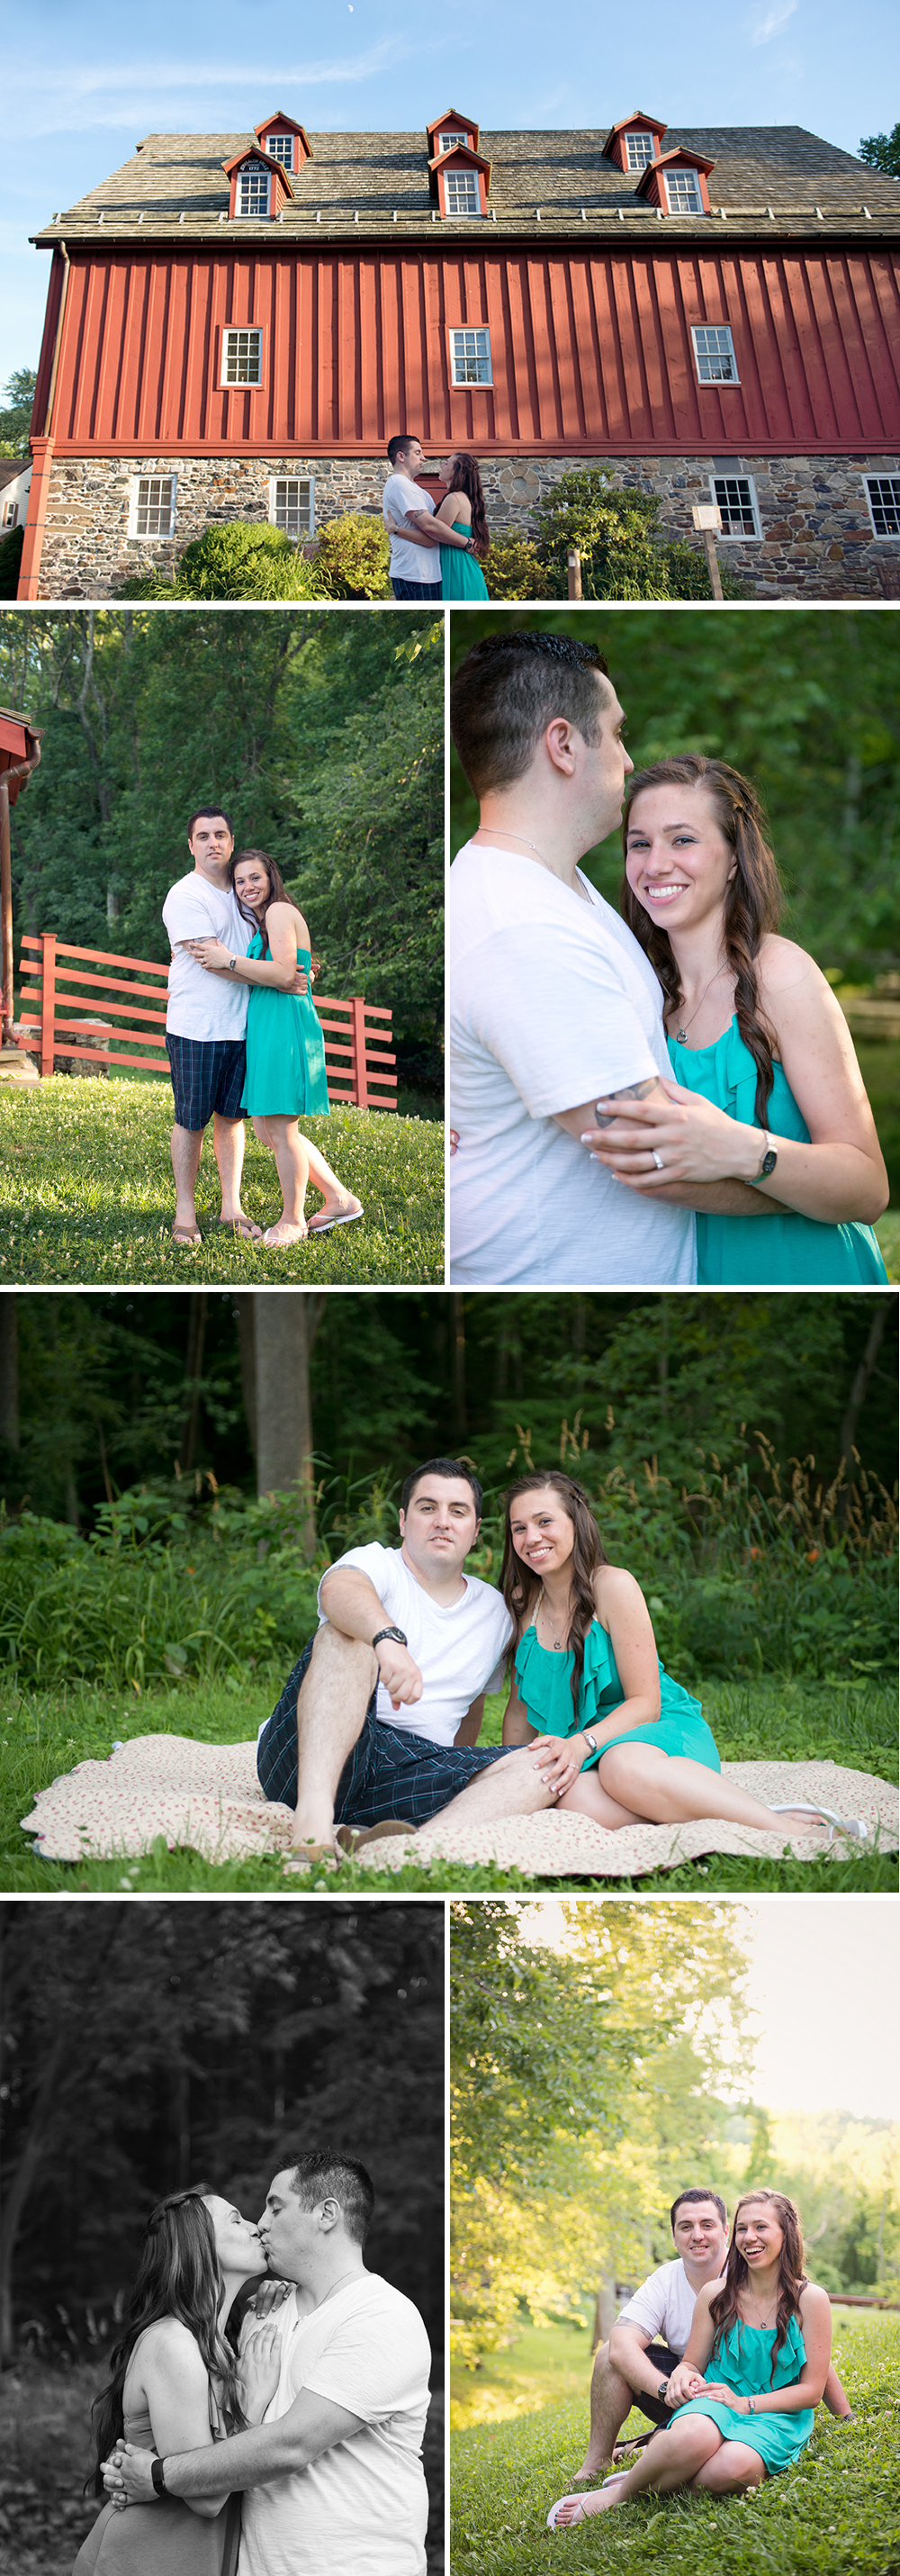 Harford_County_Engagement-08